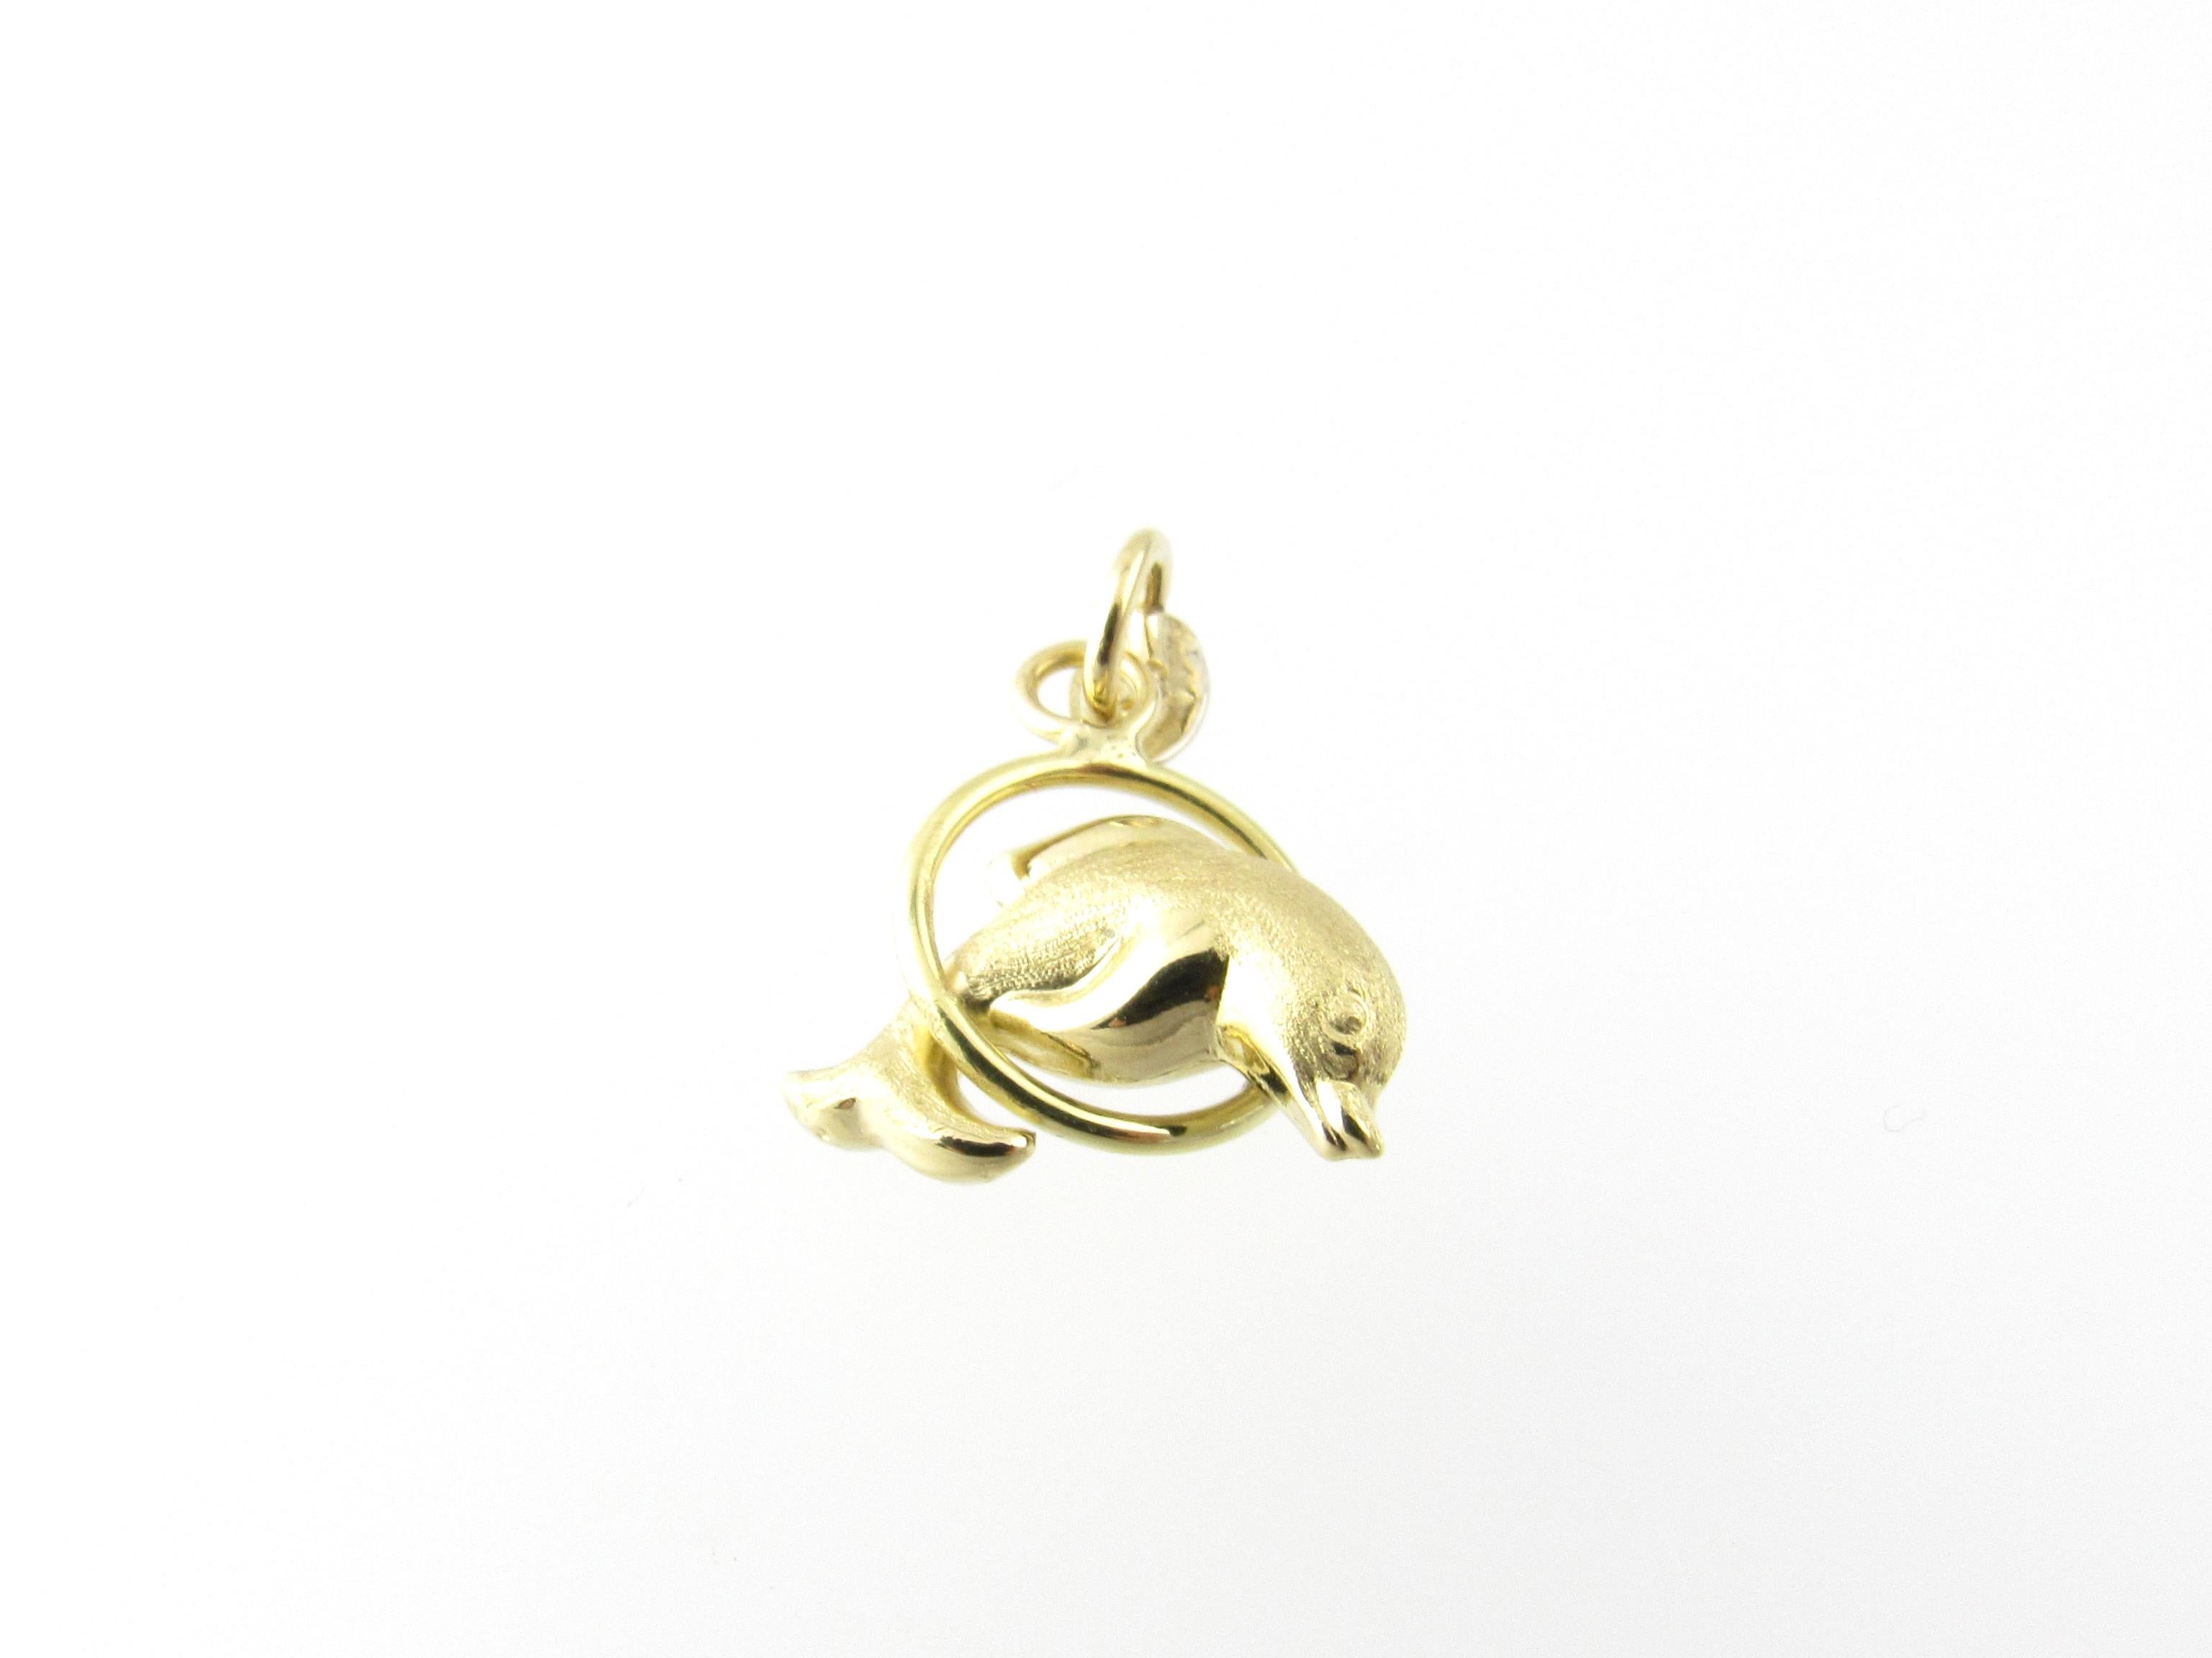 Vintage 18 Karat Yellow Gold Dolphin Charm

The dolphin represents harmony and balance.

This lovely charm features a 3D dolphin jumping through a hoop. Meticulously detailed in 18K yellow gold.

Size: 18 mm x 16 mm (actual charm)

Weight: 1.2 dwt.